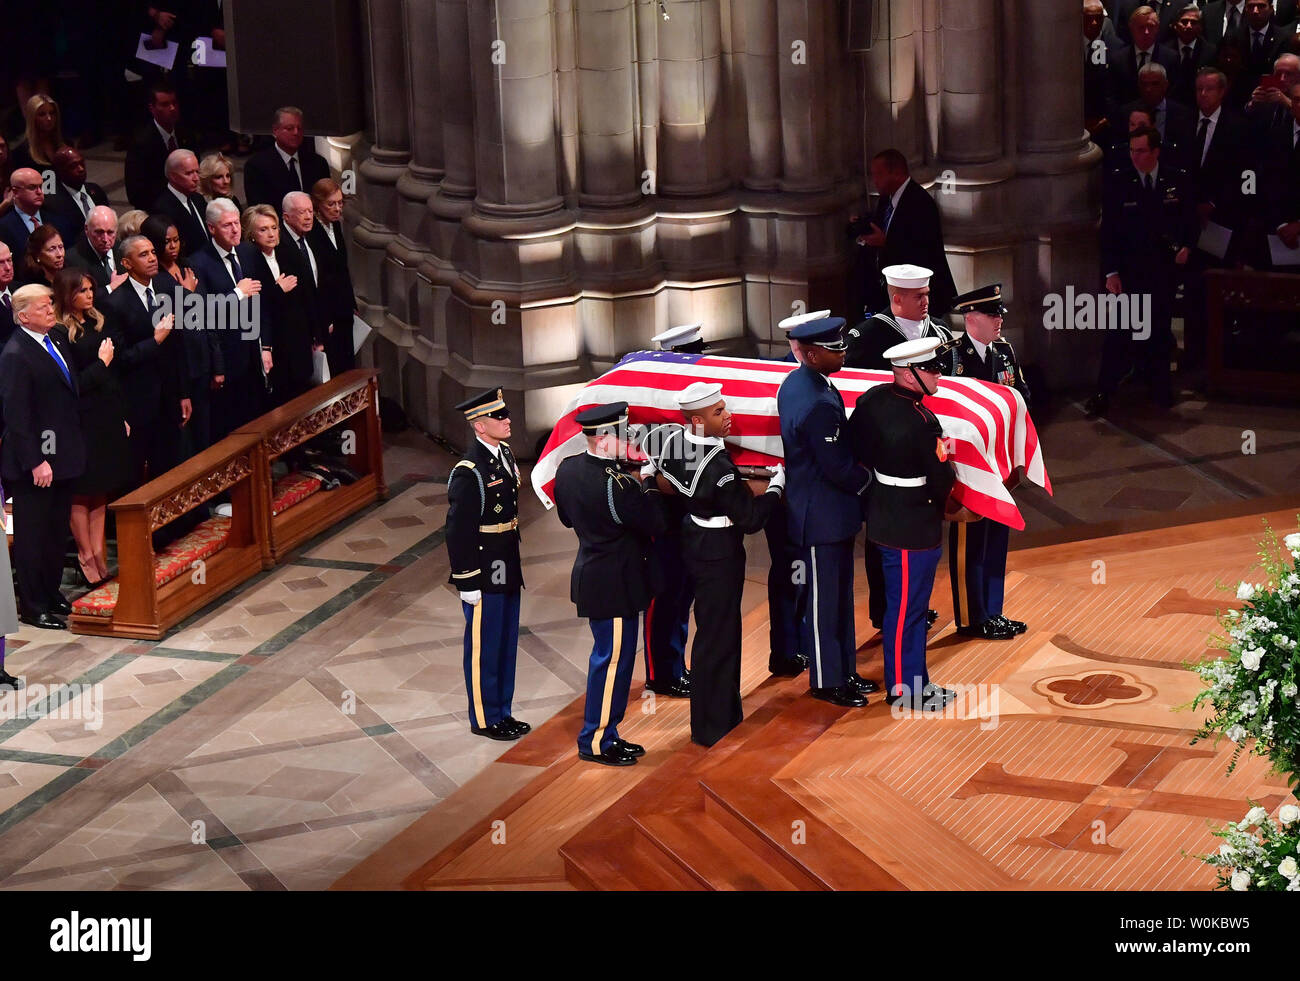 The casket arrives for the funeral of former President George H.W. Bush at the National Cathedral in Washington D.C. on December 5, 2018. Photo by Kevin Dietsch/UPI Stock Photo